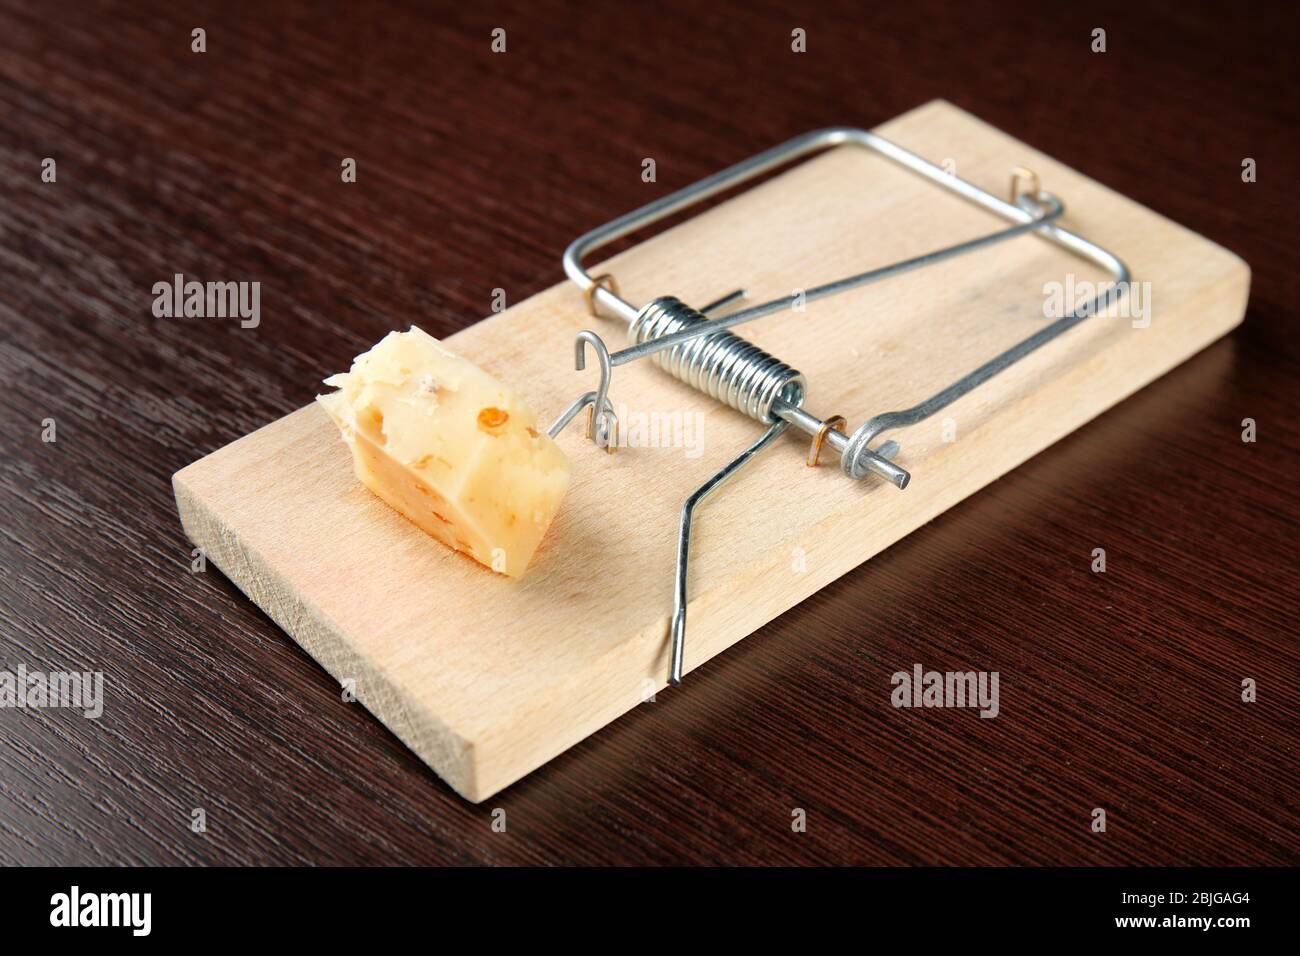 https://c8.alamy.com/comp/2BJGAG4/mousetrap-with-cheese-on-wooden-background-2BJGAG4.jpg